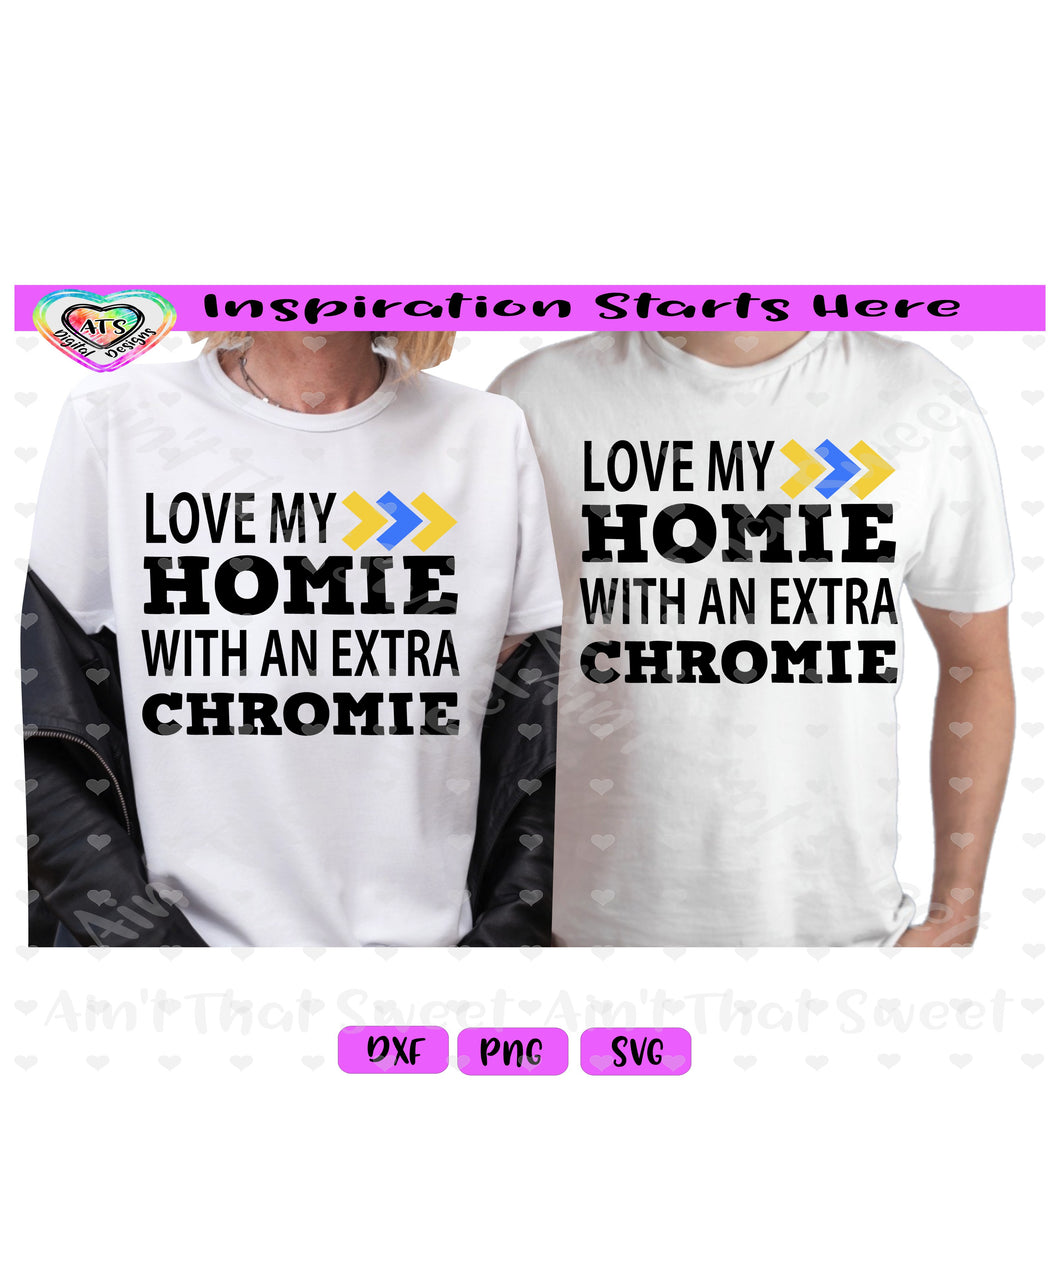 Love My Homie With An Extra Chromie - Transparent PNG SVG DXF - Silhouette, Cricut, ScanNCut